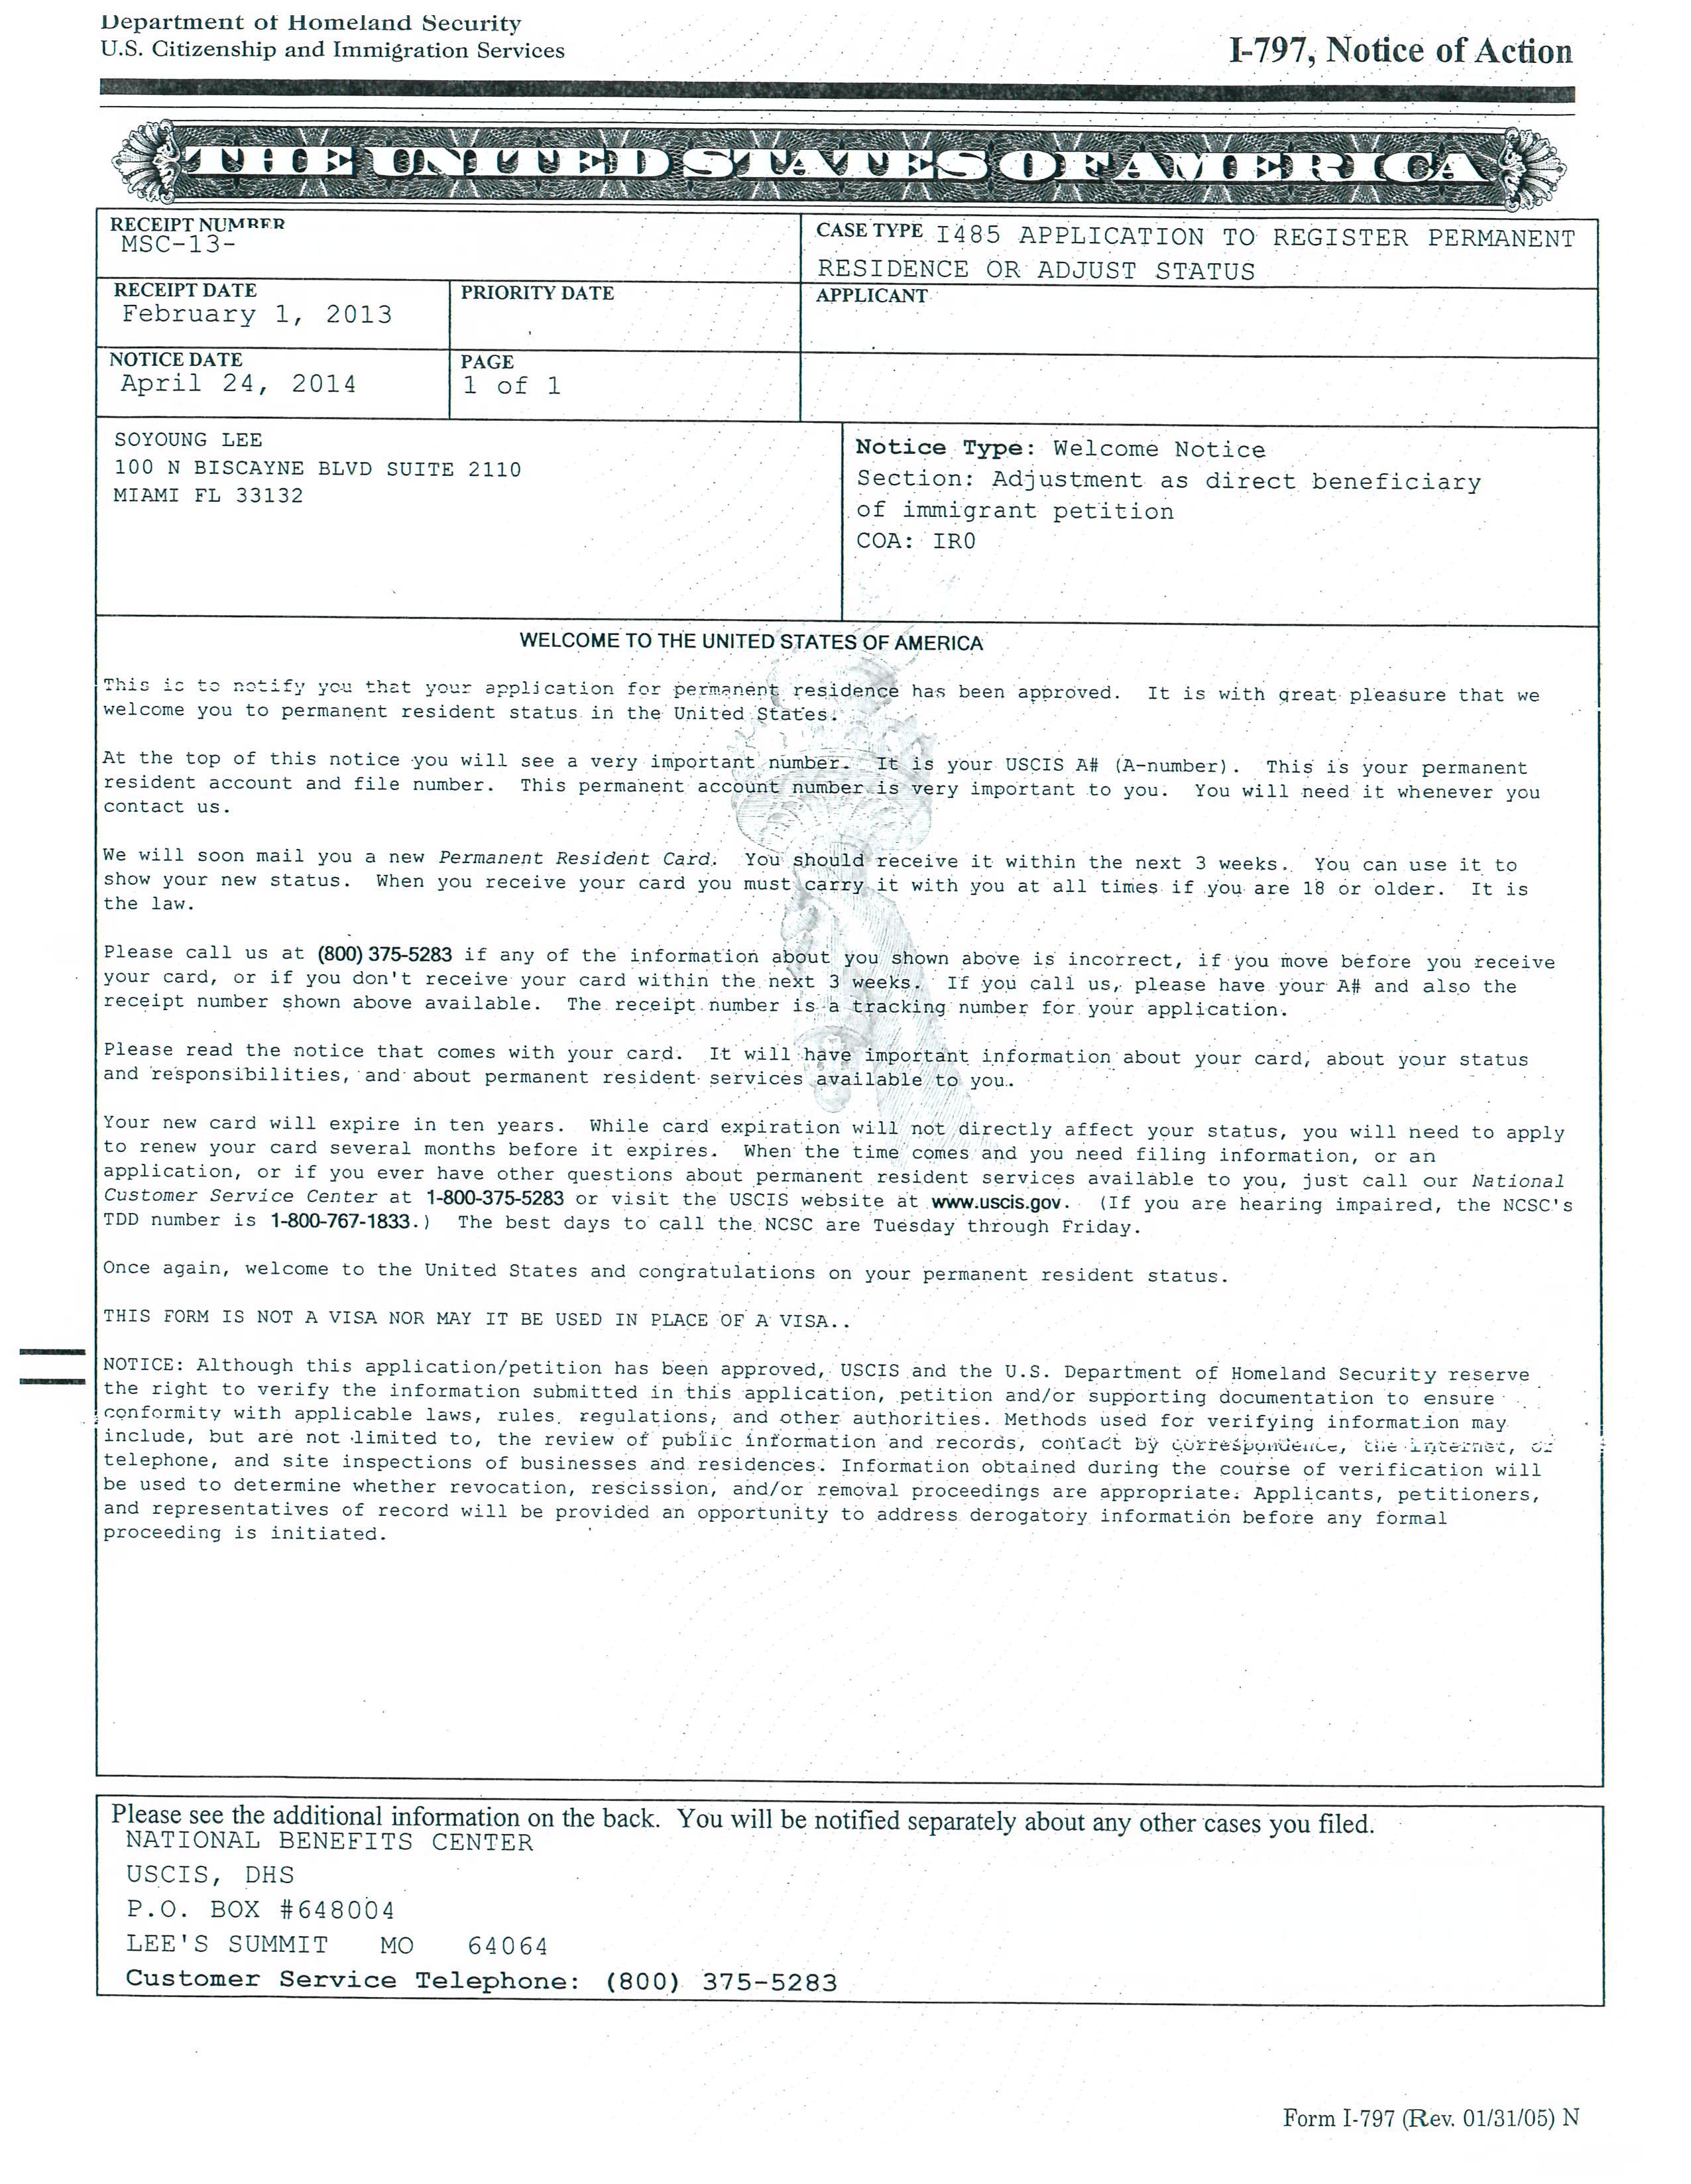 marriagepetitionapprovalnotice04102014(2).jpg